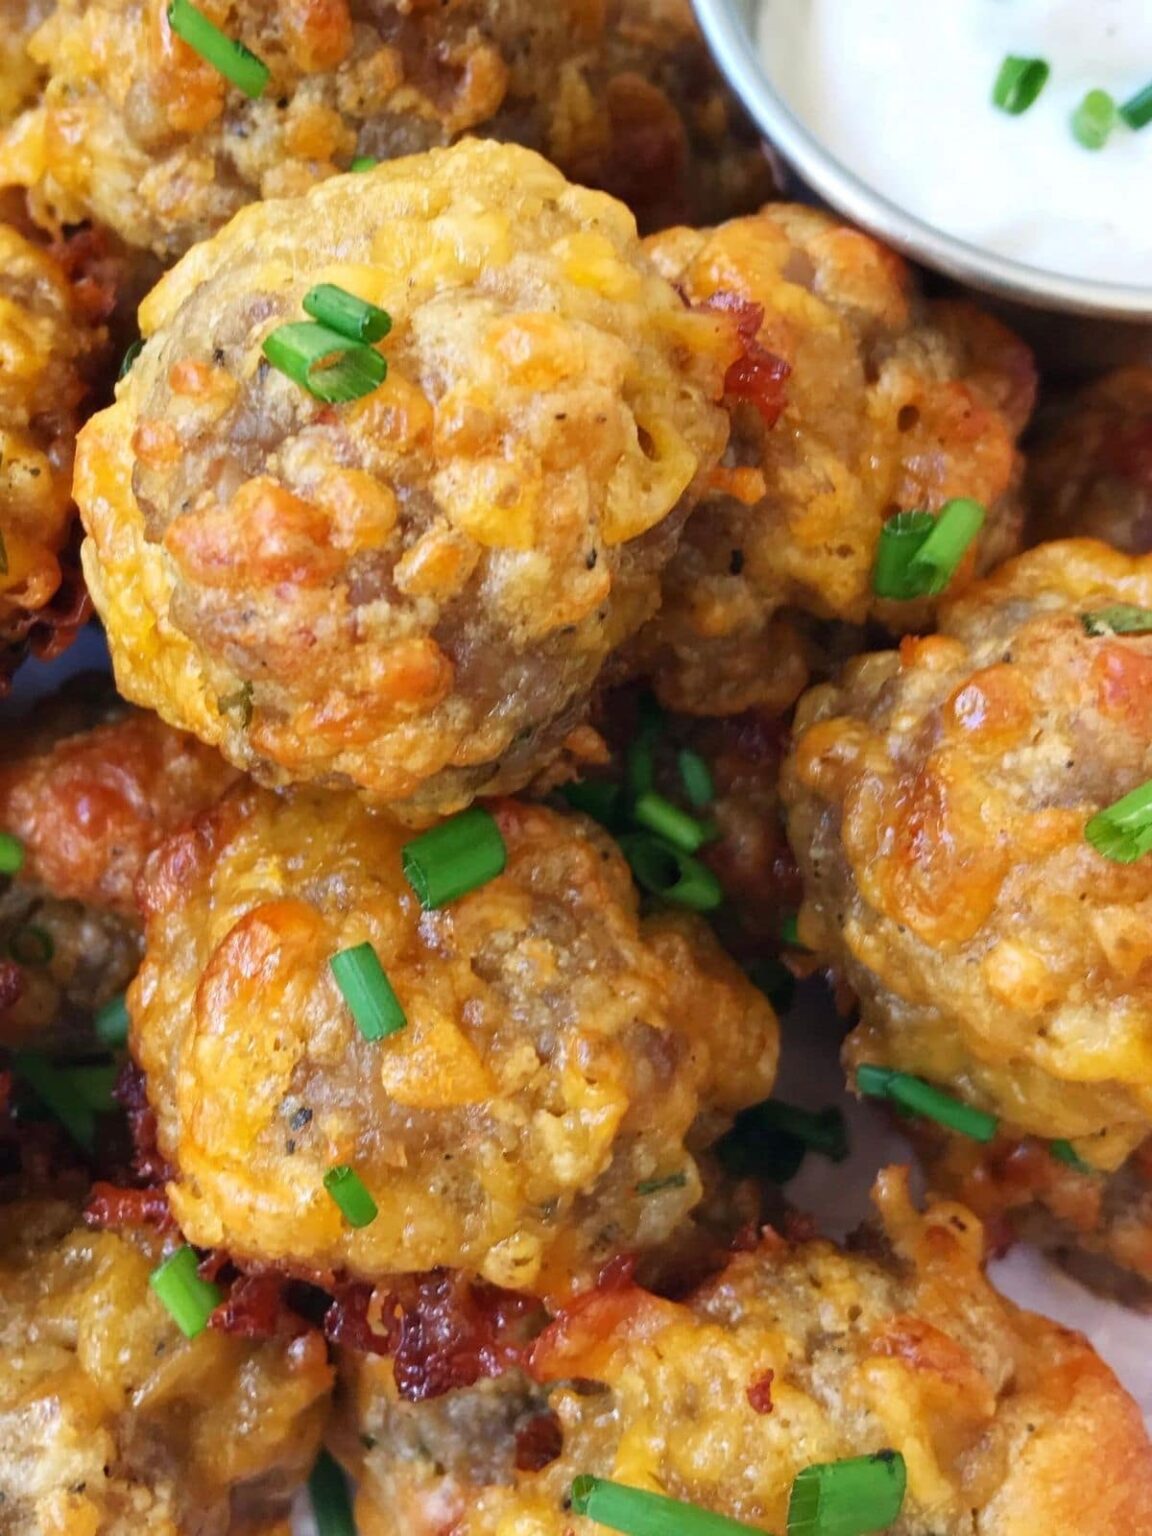 Spicy Sausage Cheese Balls with Horseradish Cream - My Casual Pantry